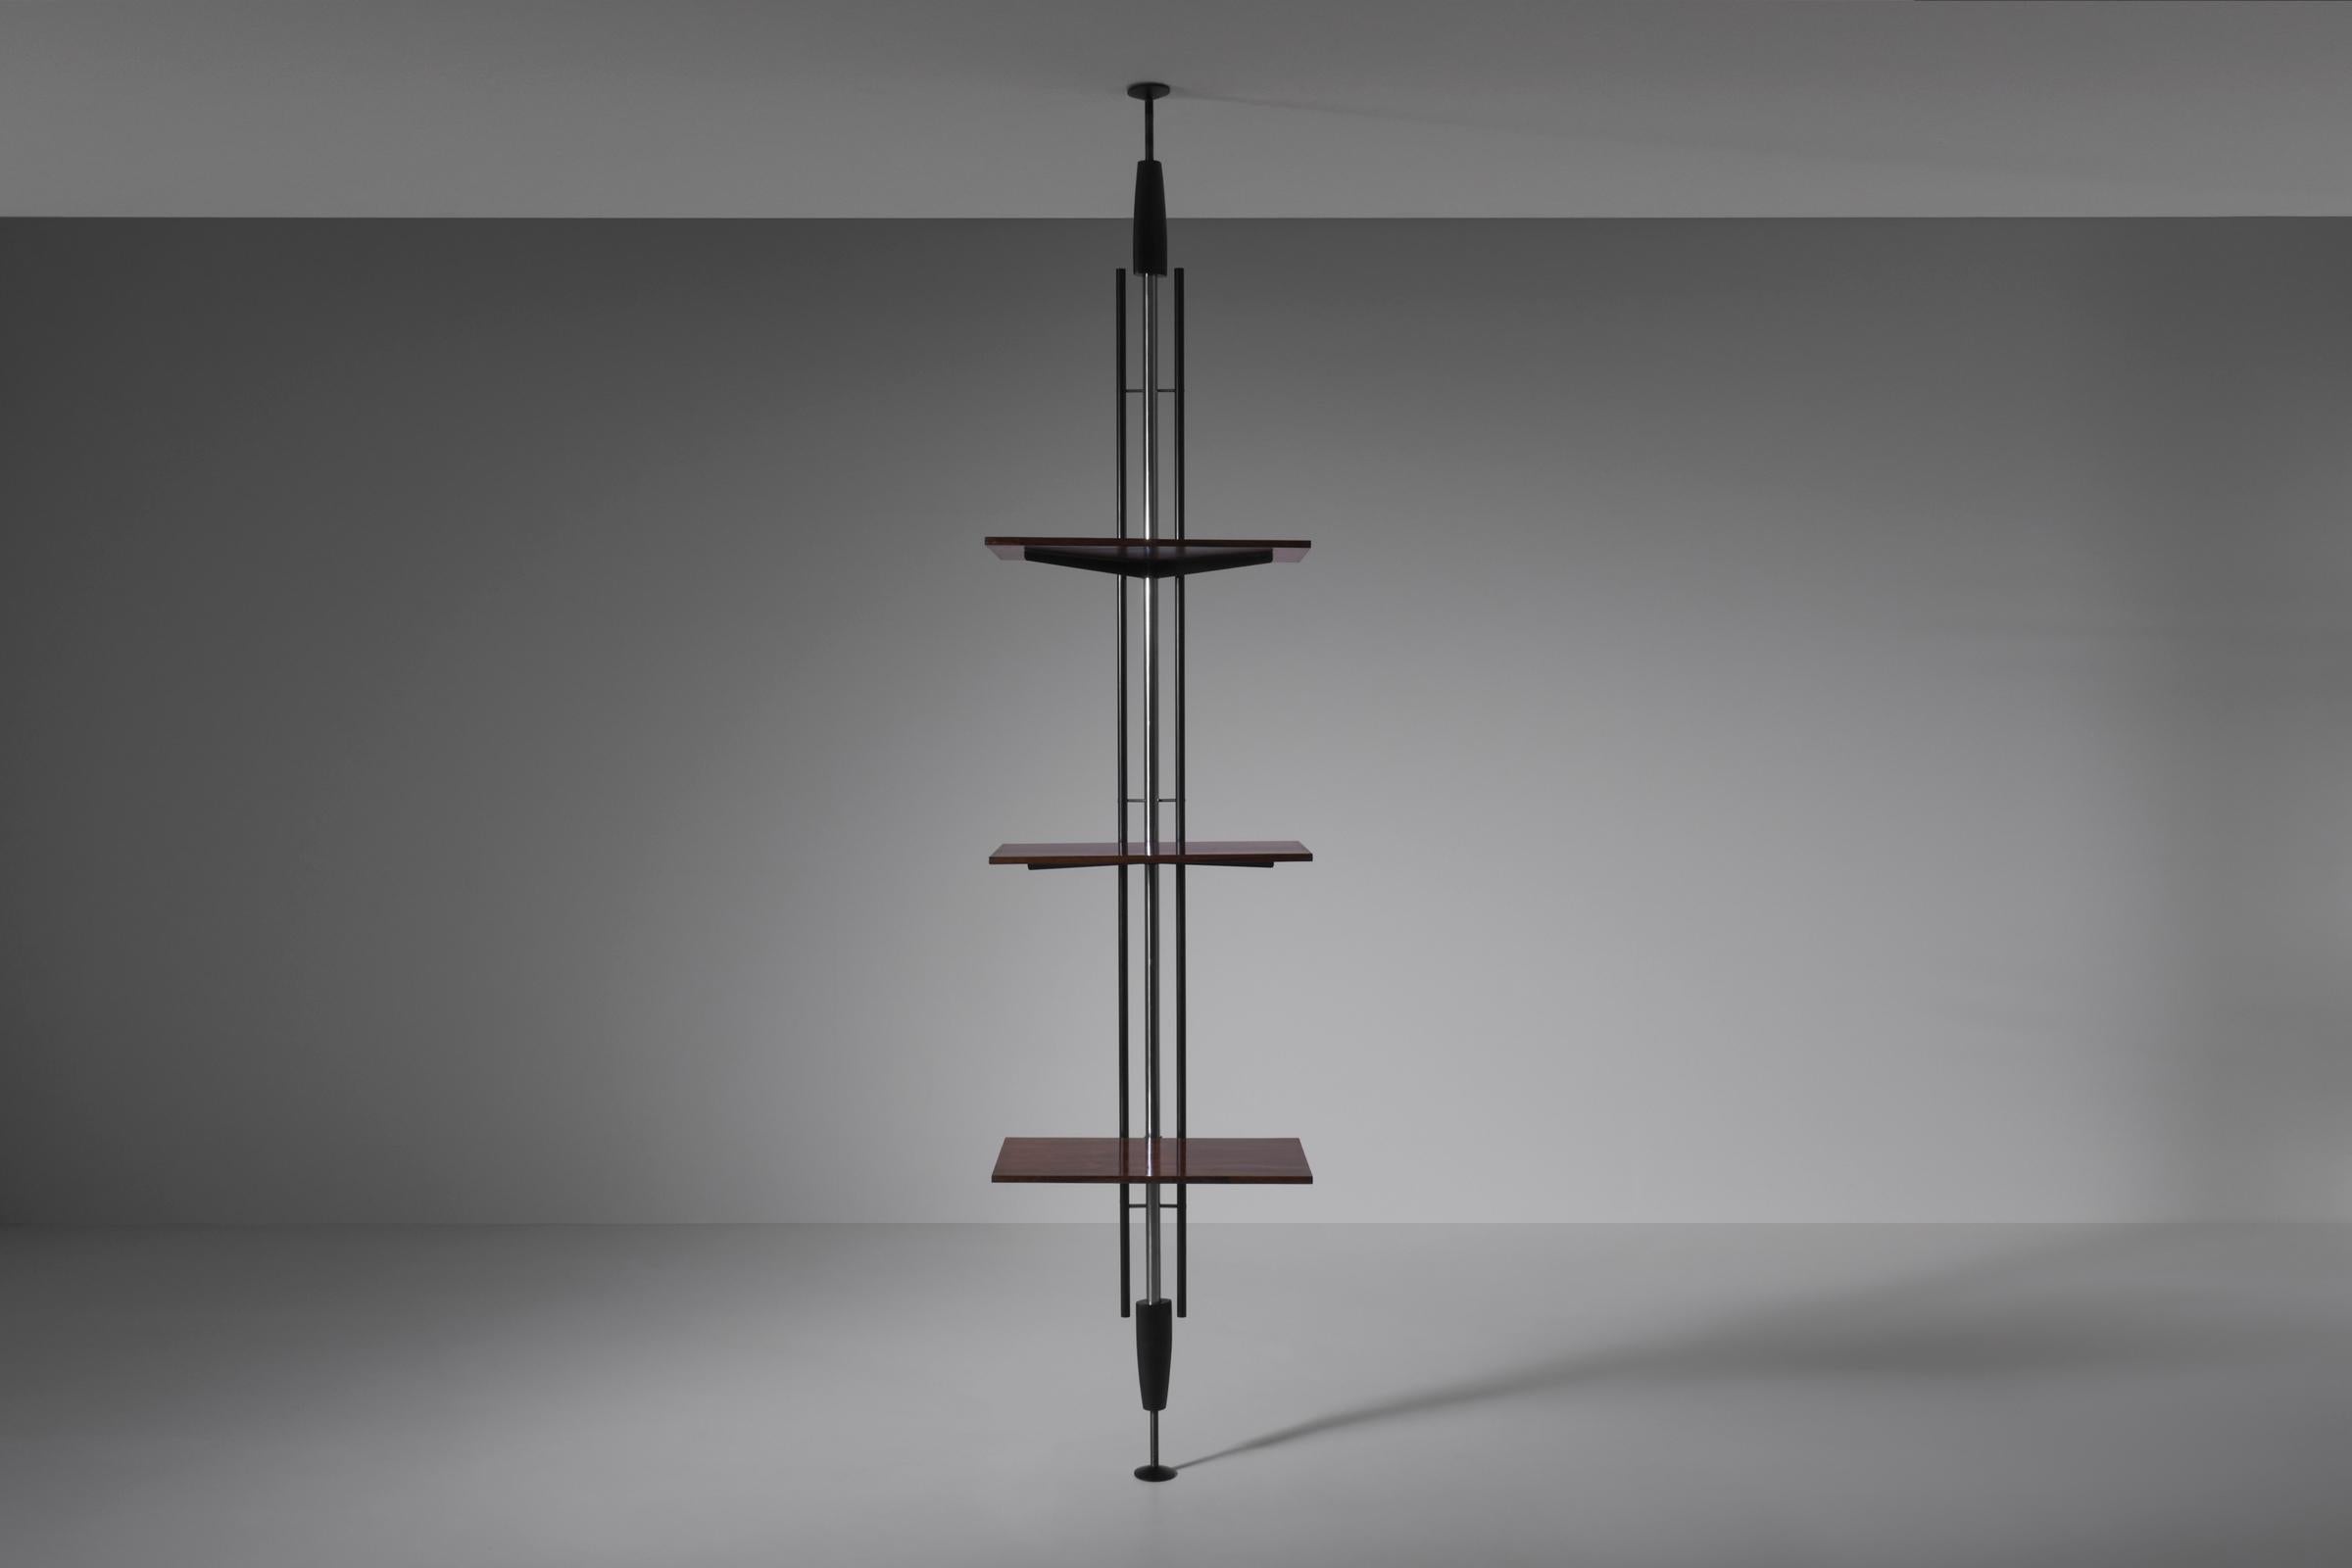 Bookshelf by Carlo Hauner & Martin Eisler for Forma, 1960. Sophisticated minimal design consisting of a large chromed metal stem, black lacquered metal elements and fine Rosewood shelves. The Rosewood shelves can be rearranged in height. Beautiful